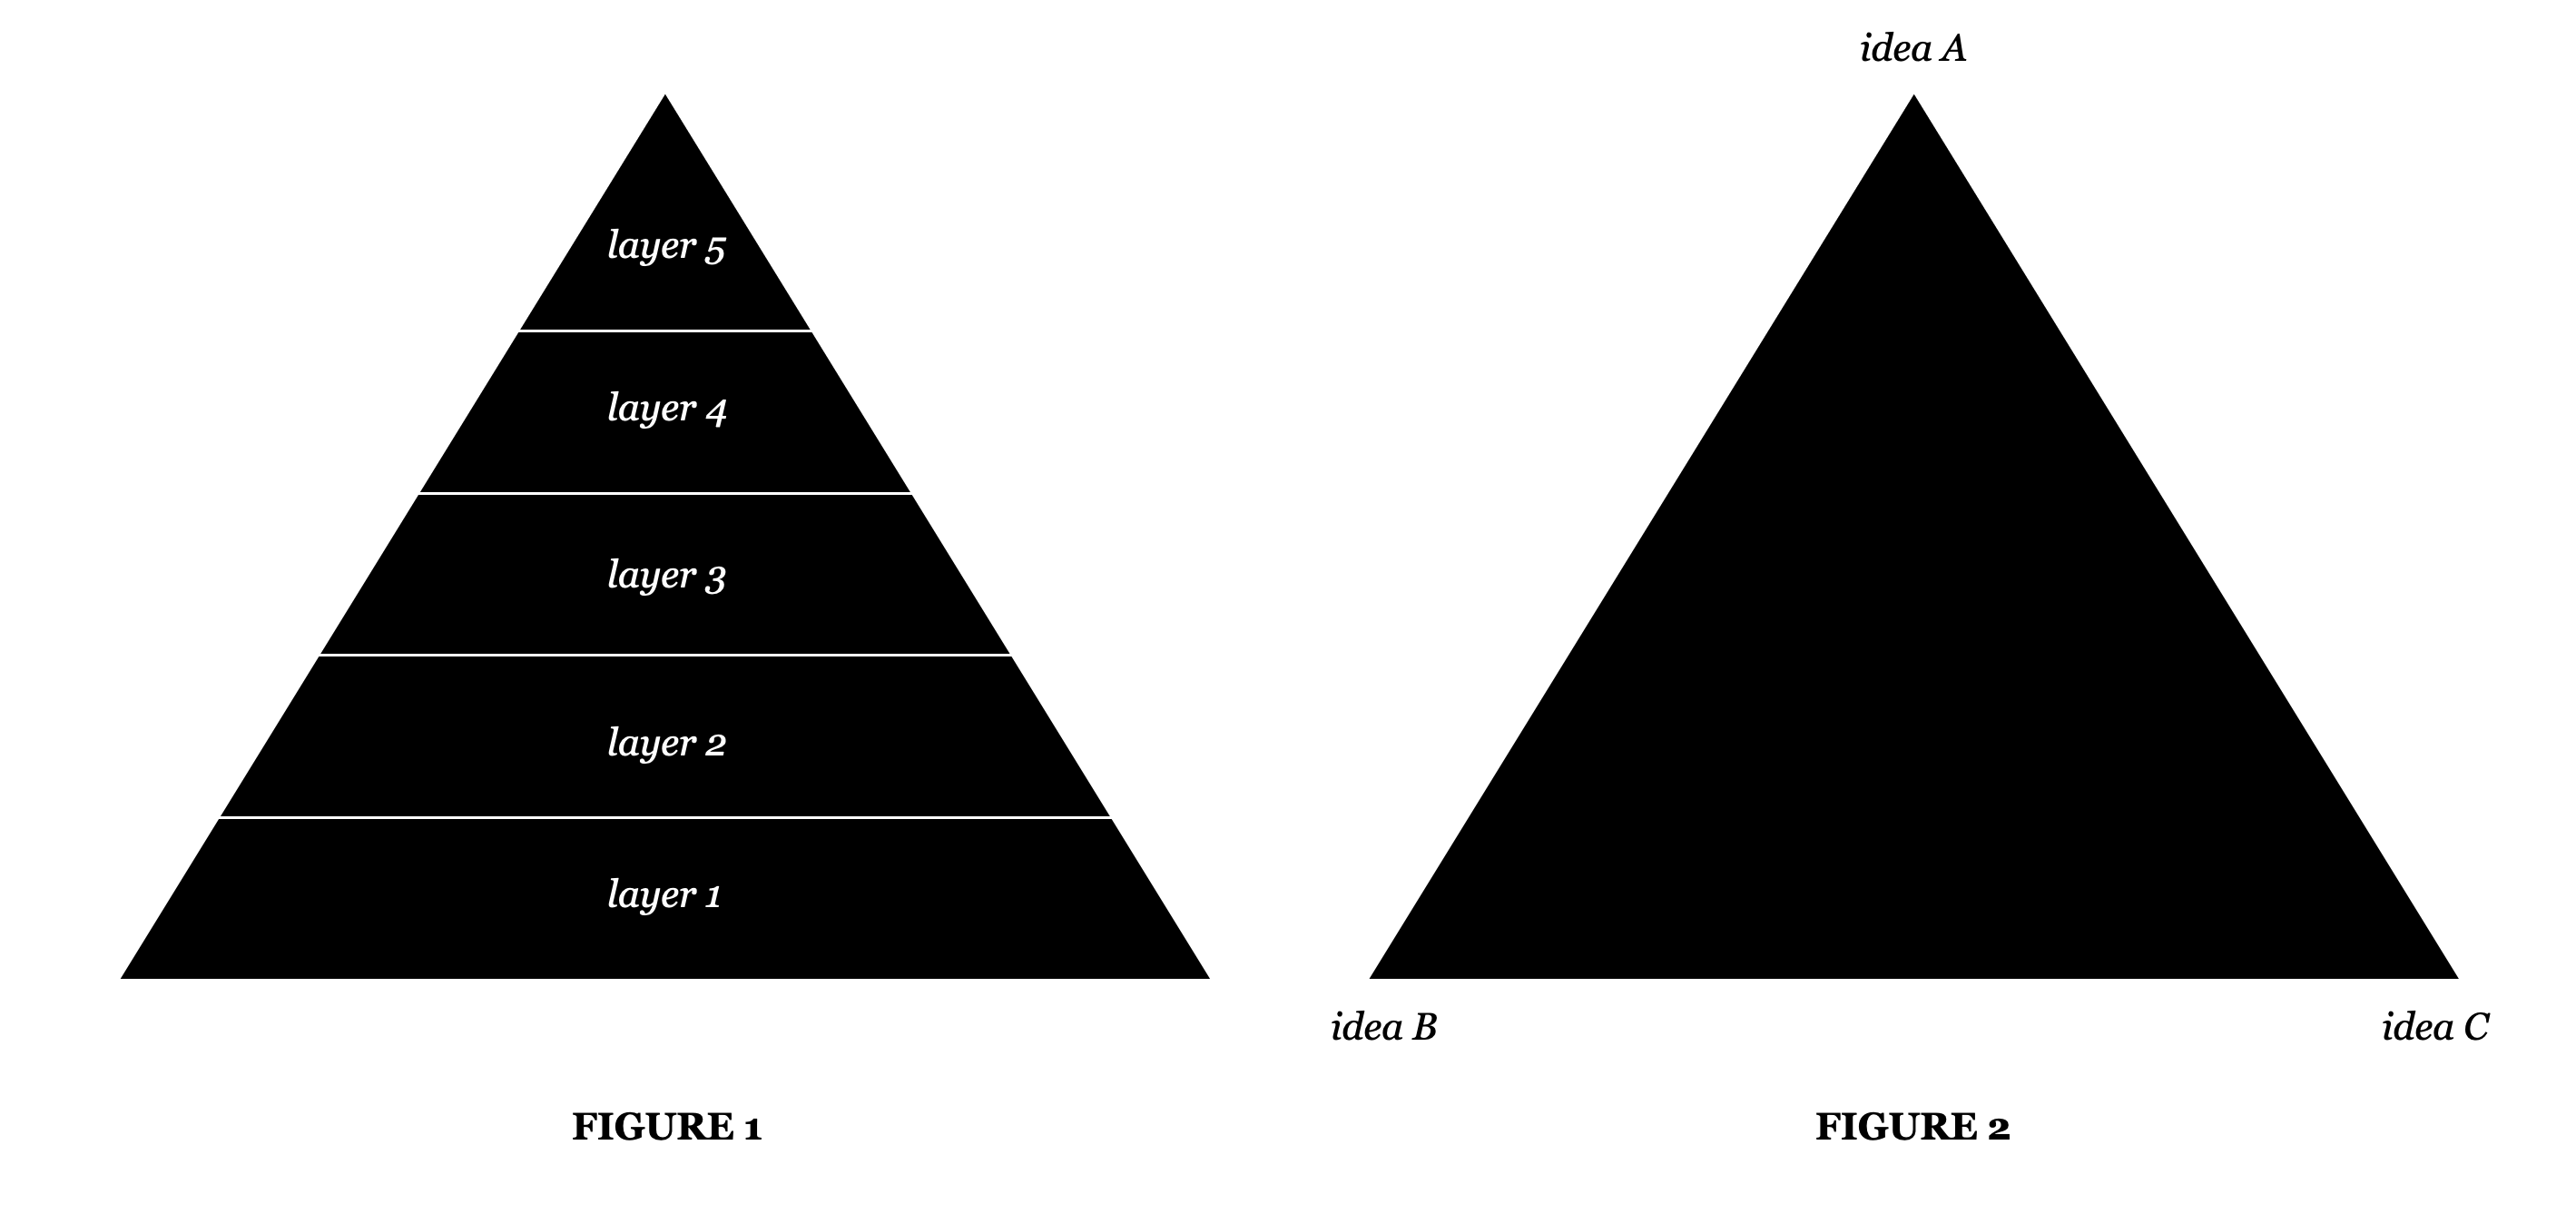 You Only Get One Triangle: Storytelling Is the Art of Attention